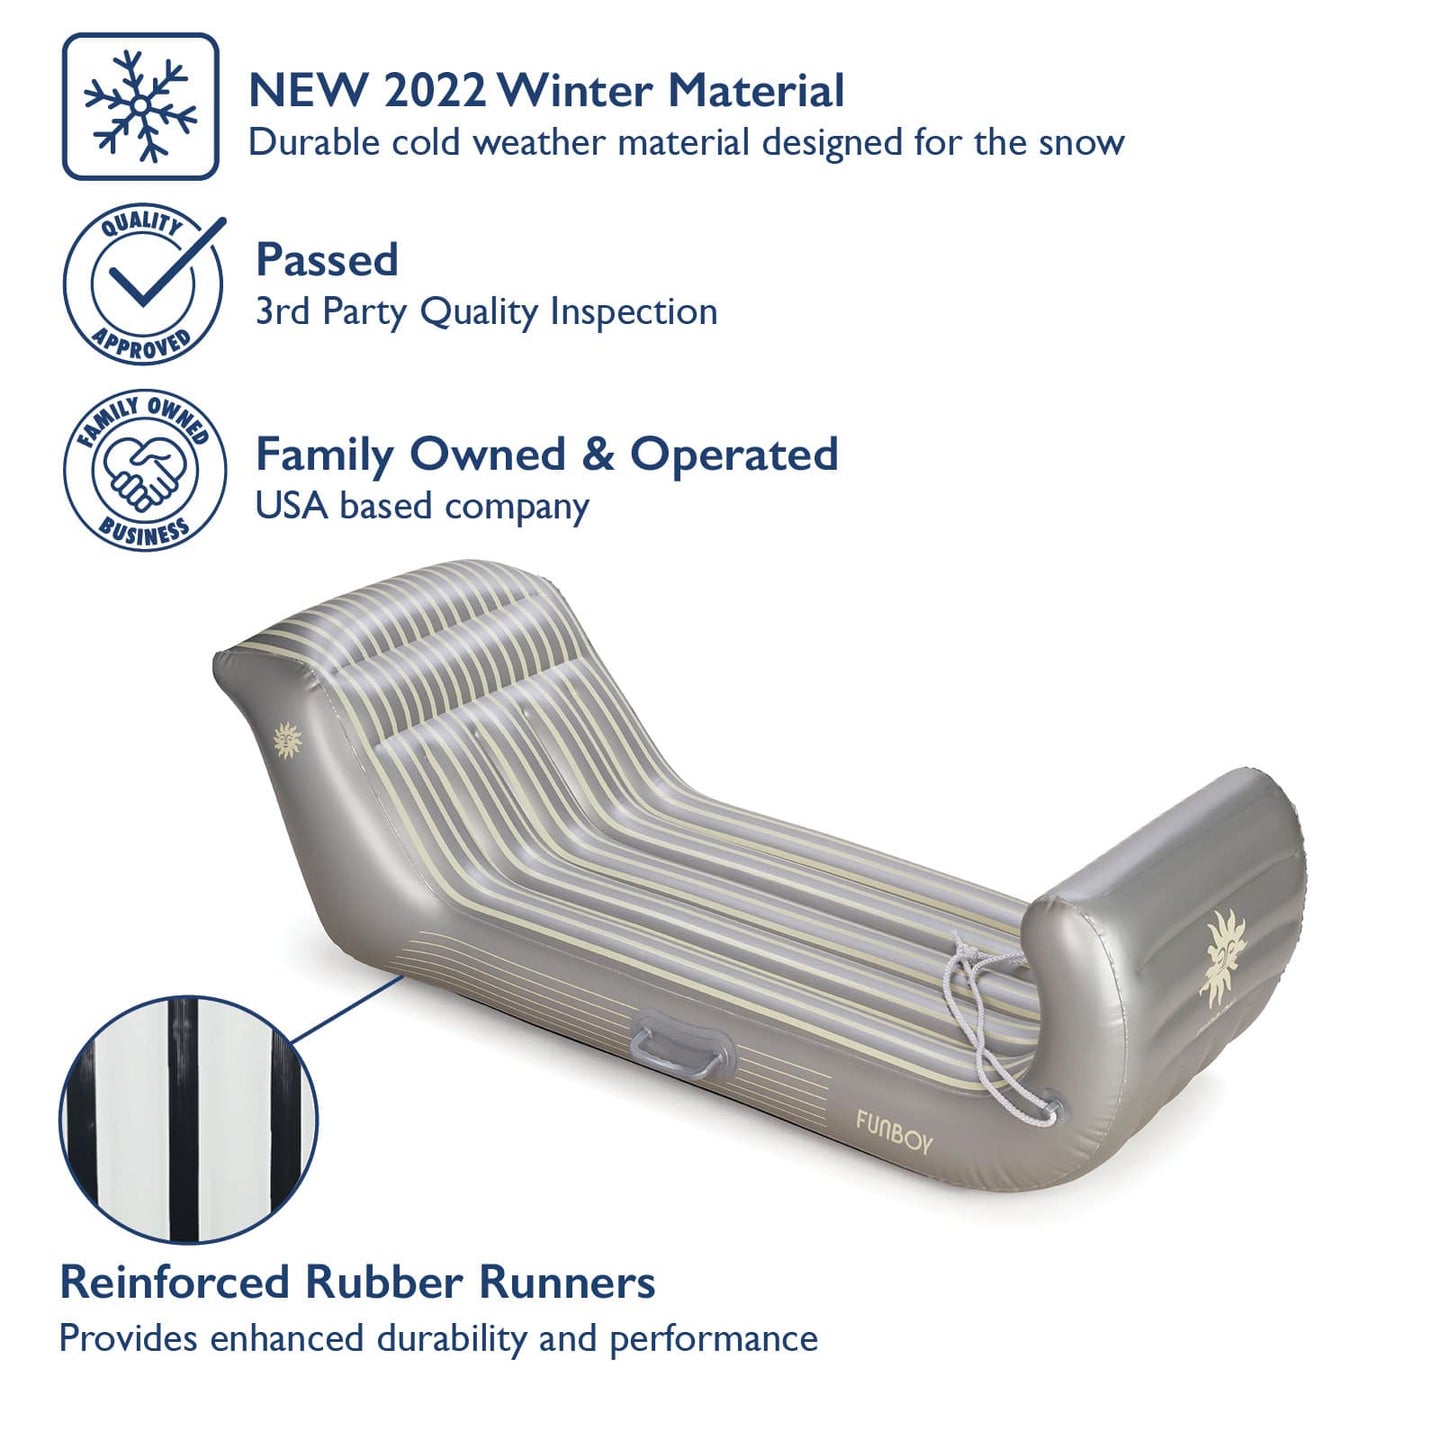 FUNBOY Winter Sled. New 2022 Winter Material. Durable cold weather material designed for snow. Passed 3rd Party Quality Inspection. Family Owned and Operated. USA Based. Reinforced Rubber Runners.  Provides enhanced durability and performance.